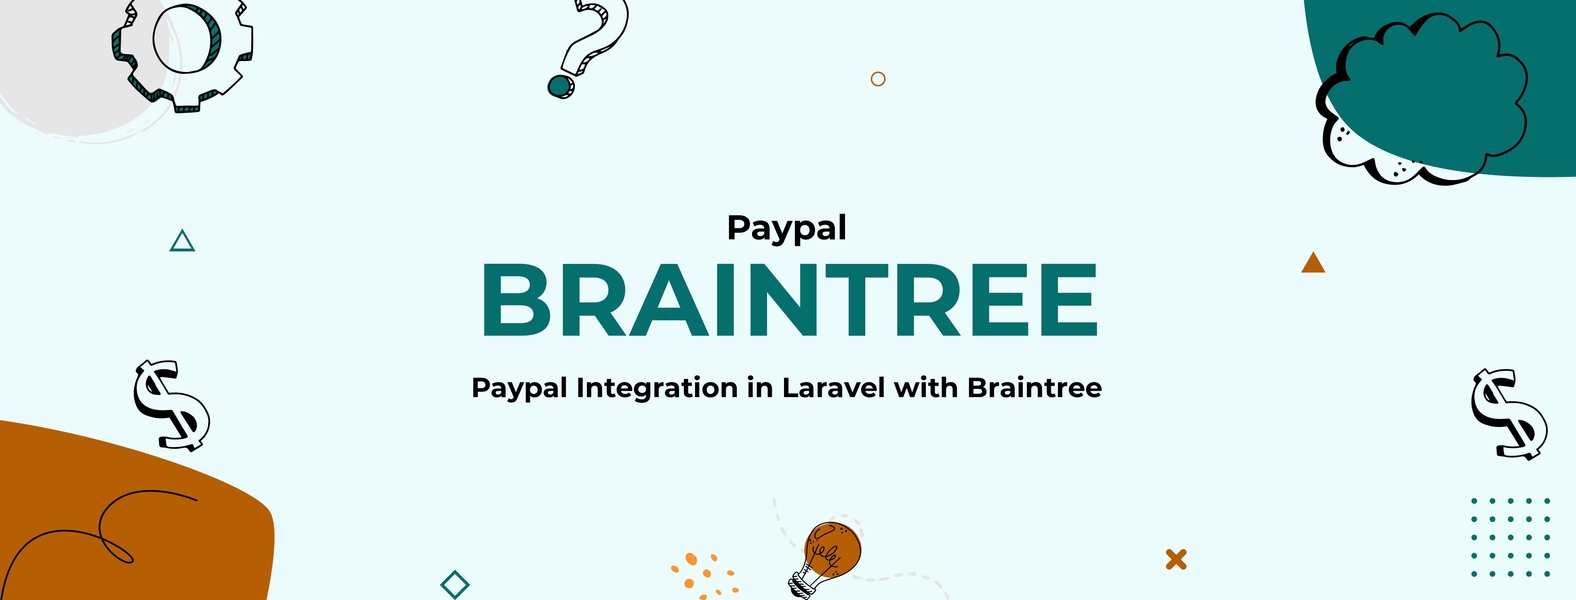 Paypal Integration in Laravel with Braintree